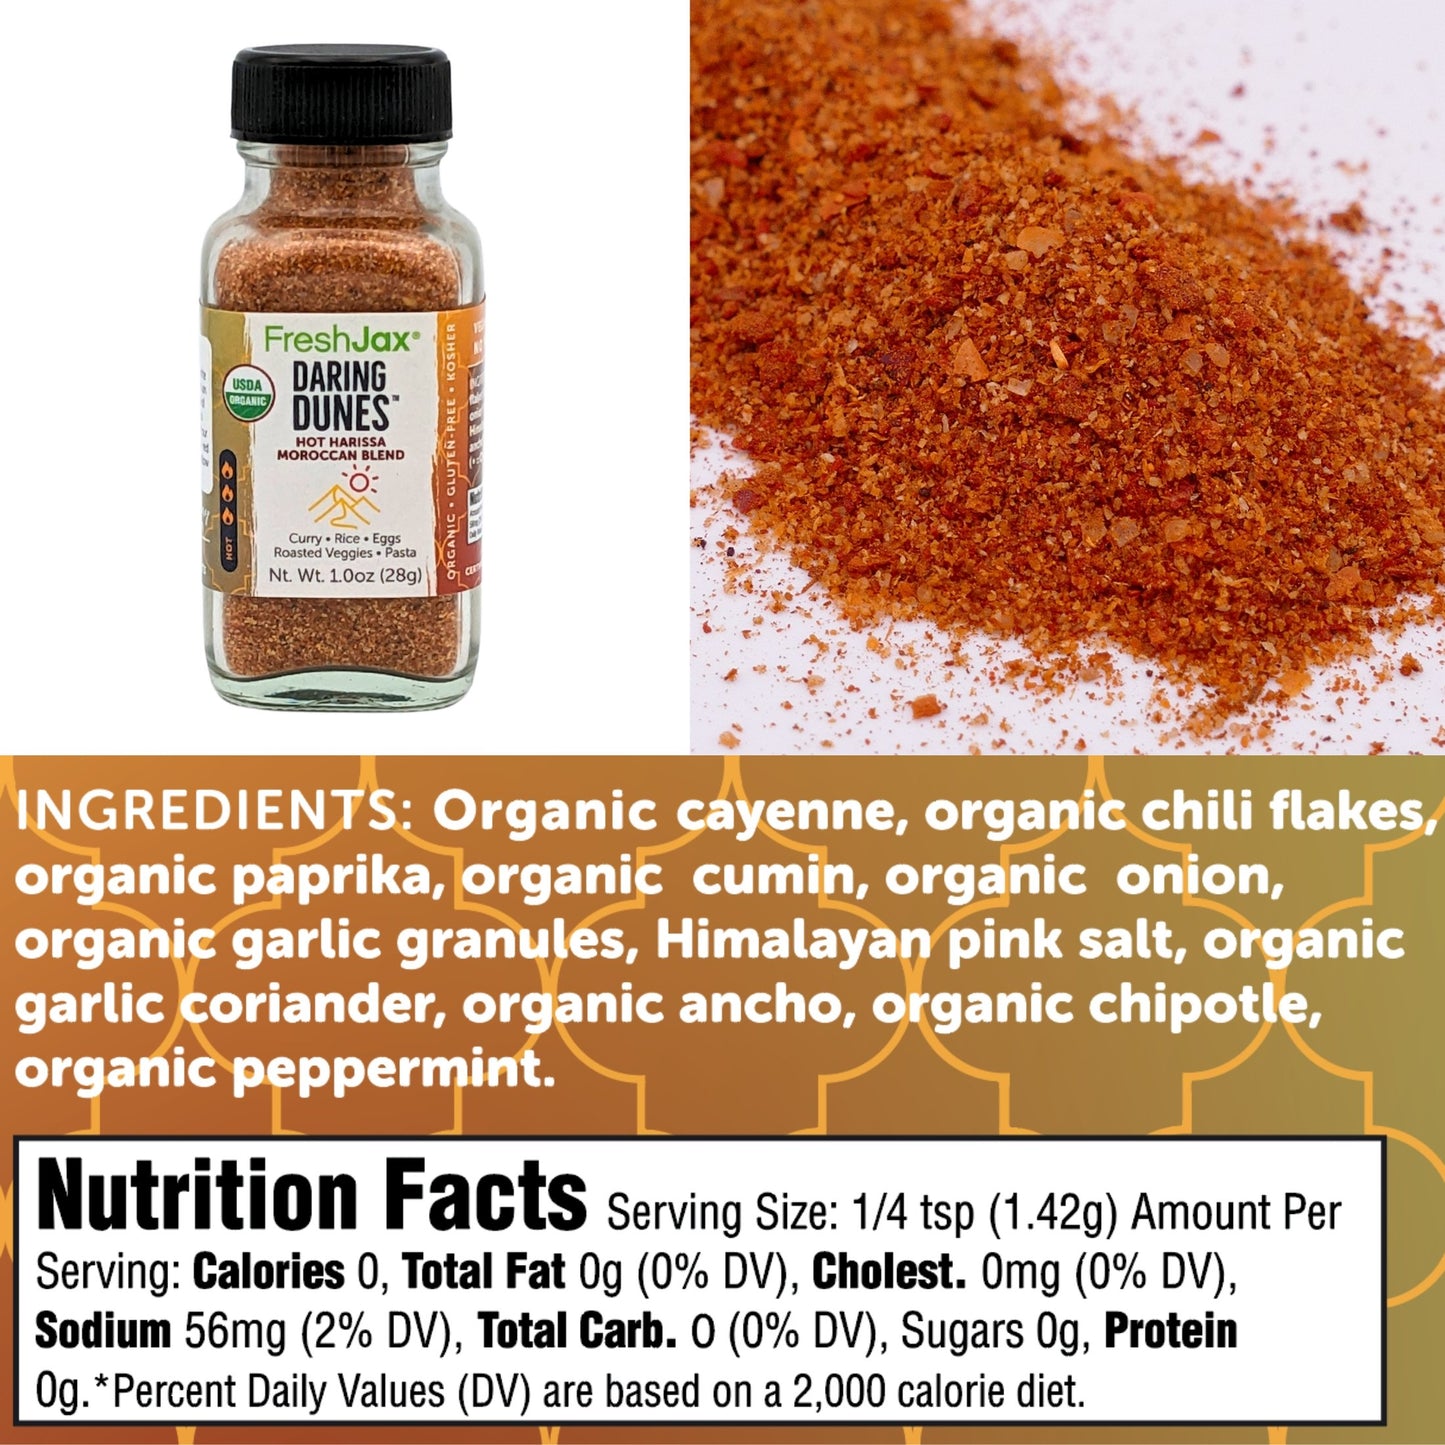 FreshJax Organic Spices Daring Dunes Hot Harissa Moroccan Blend Ingredients and Nutritional Information